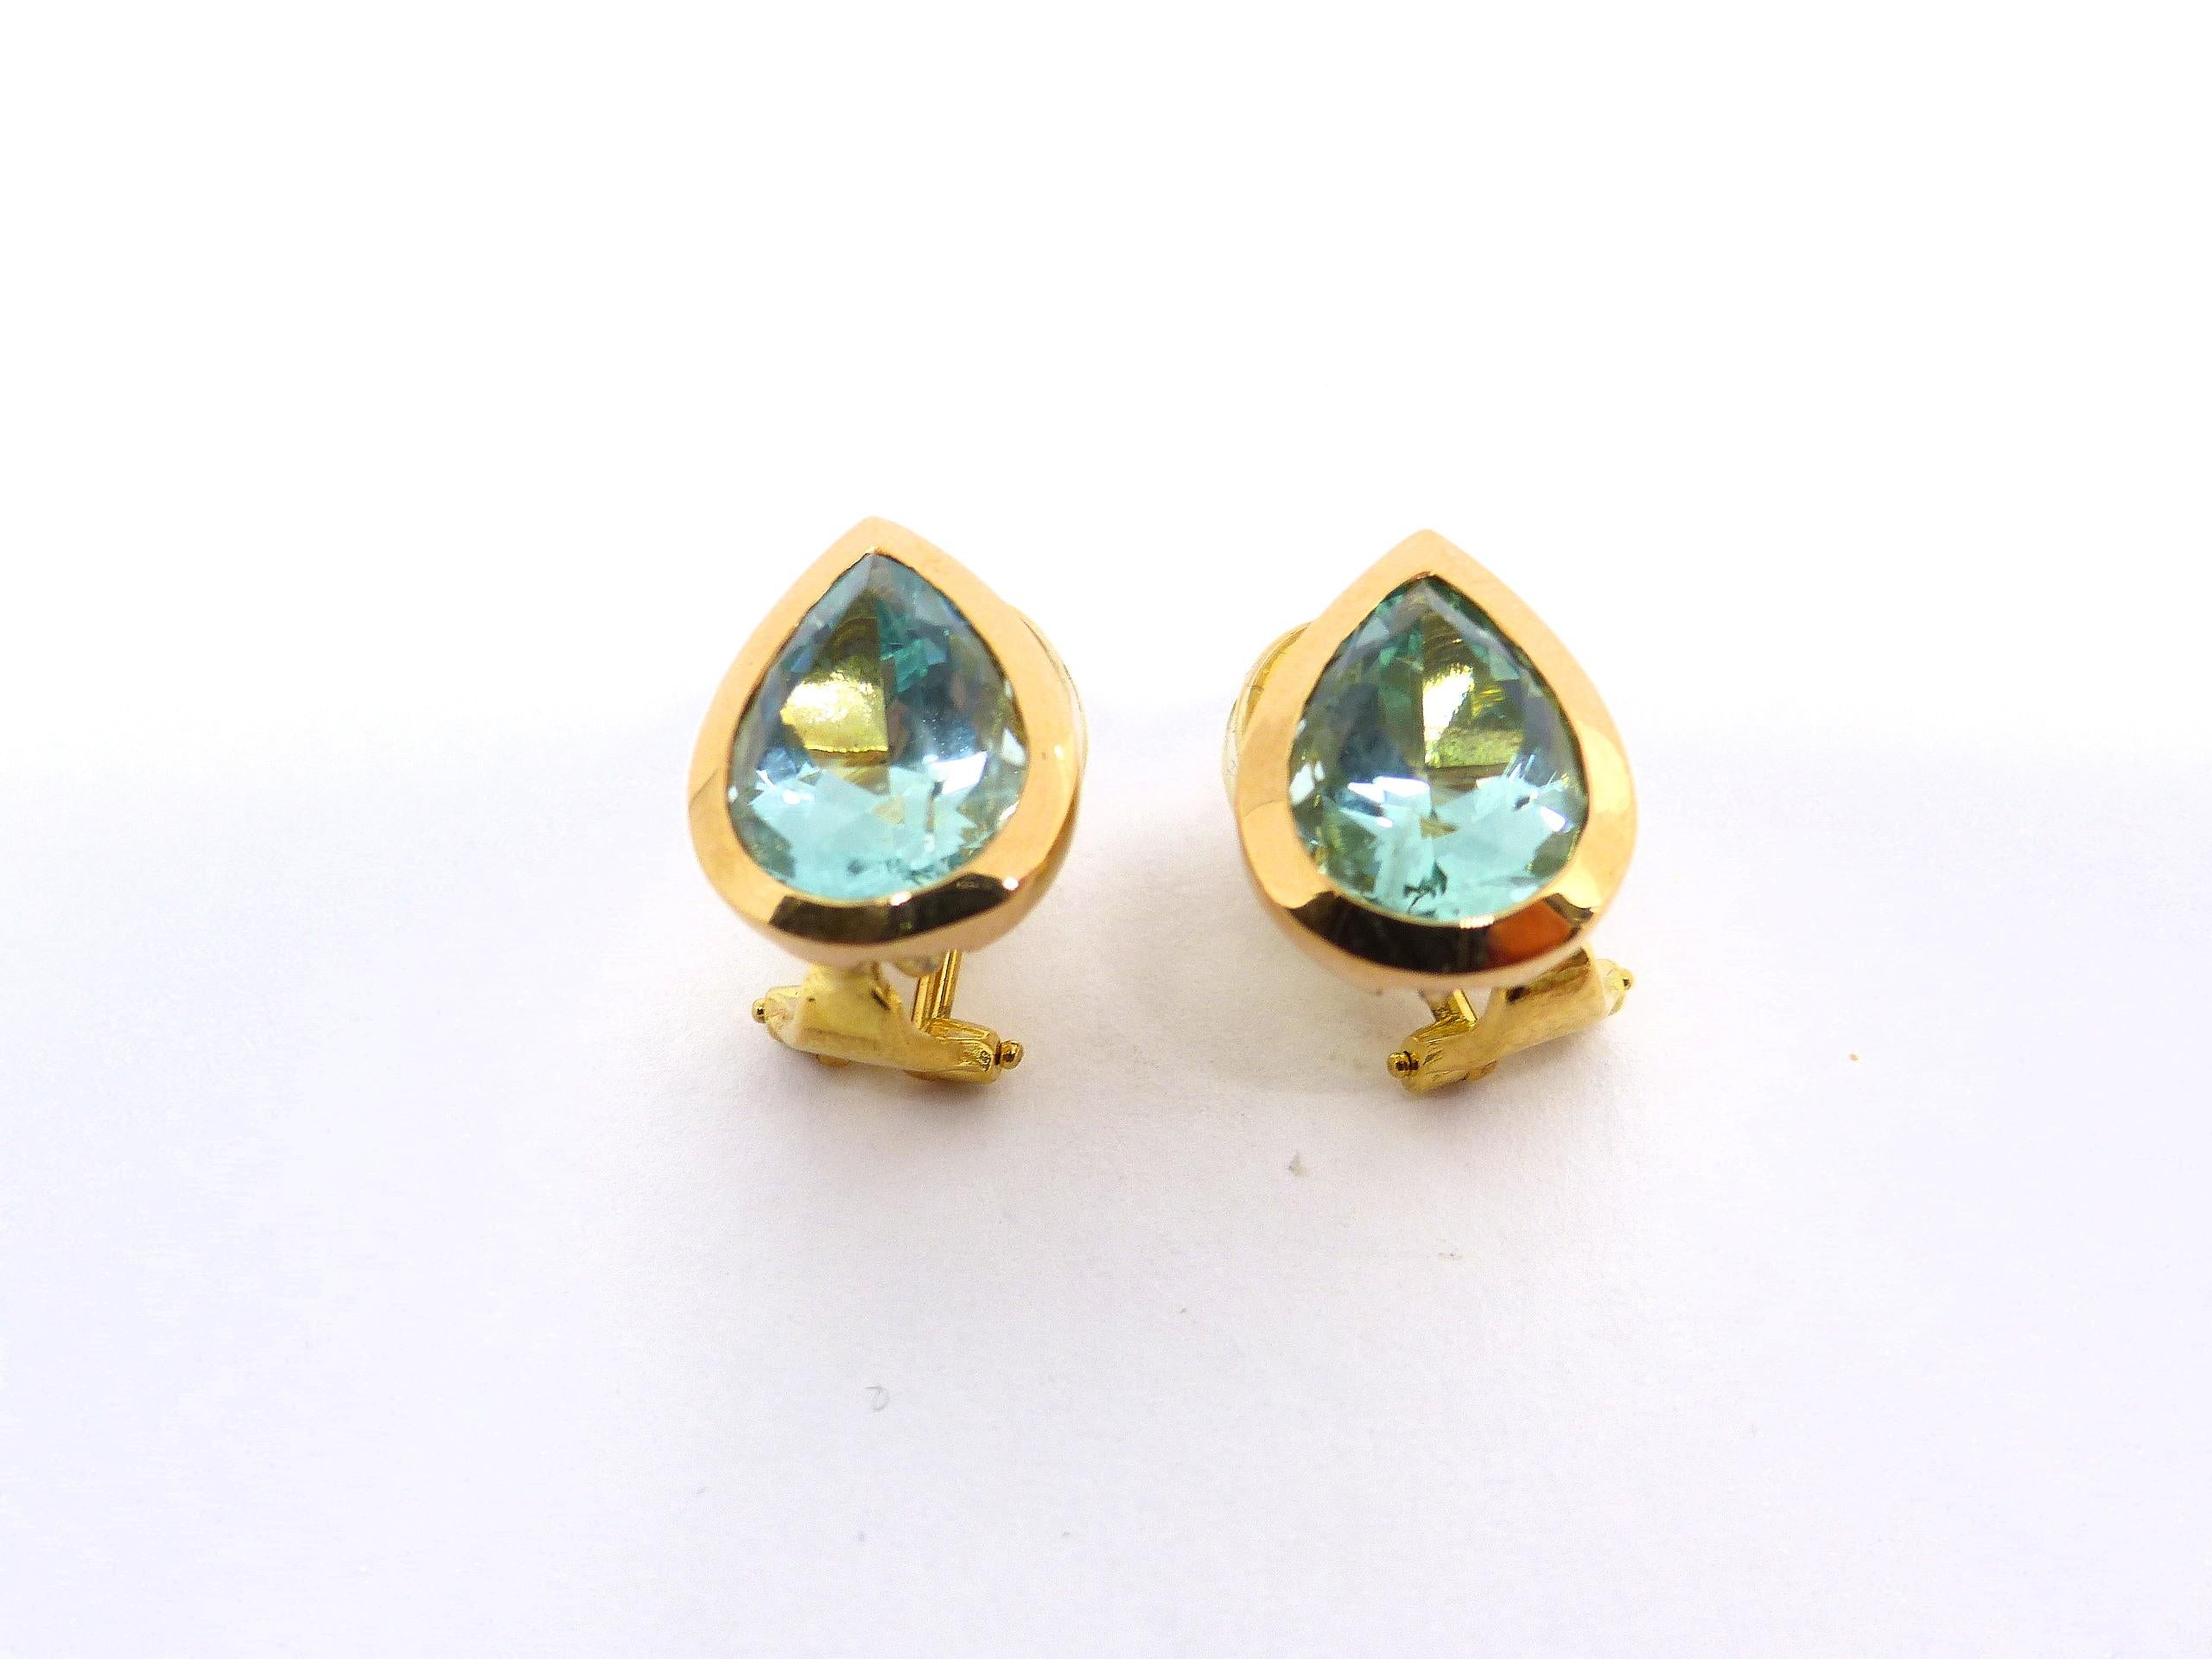 Pear Cut Earrings in Rose Gold 2 green Berylls and 2 Rosequarz Briolets and Diamonds. For Sale